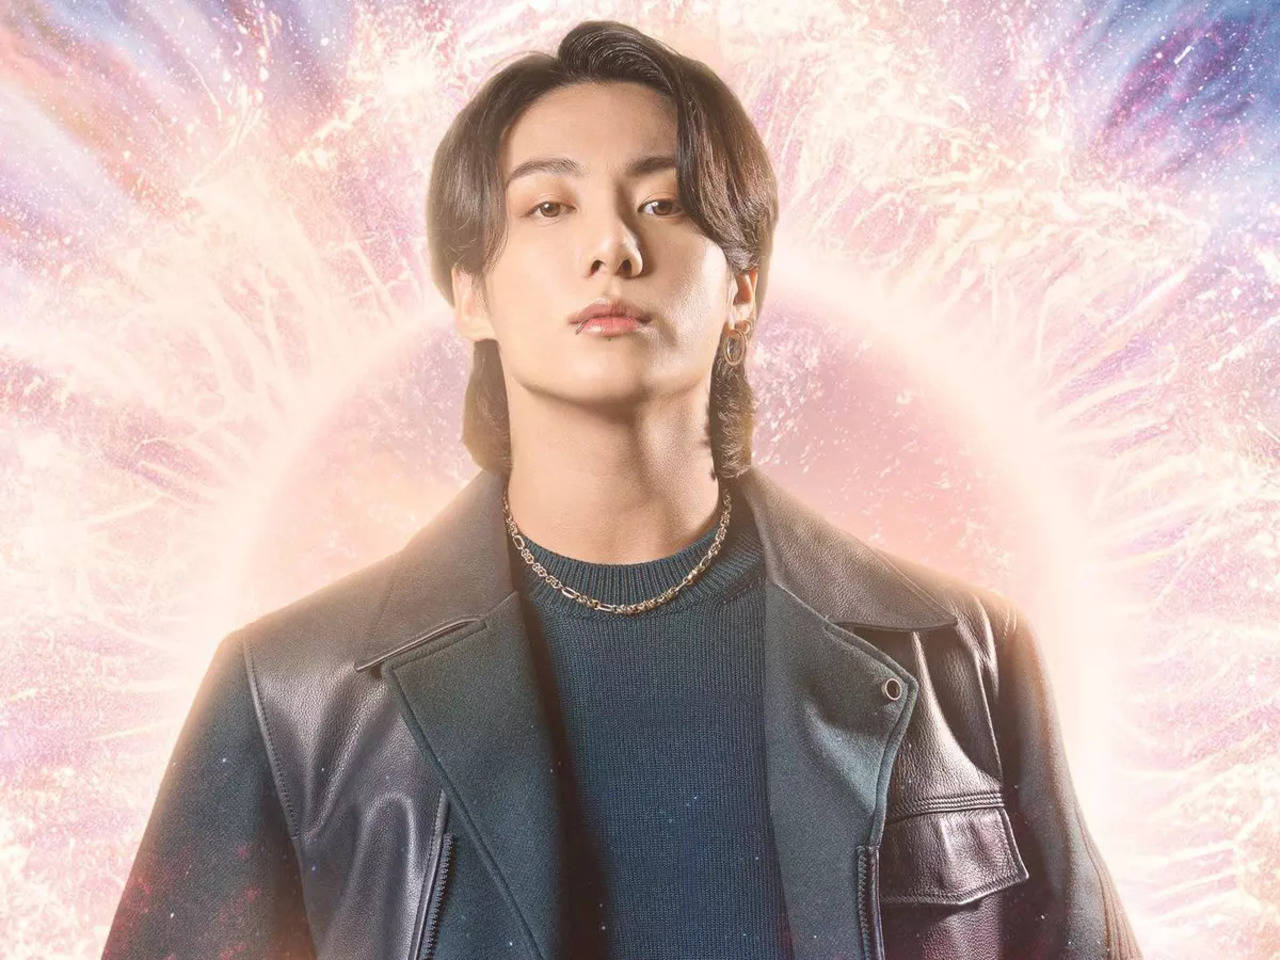 BTS' Jungkook Sets The Internet On Fire With His New Heart